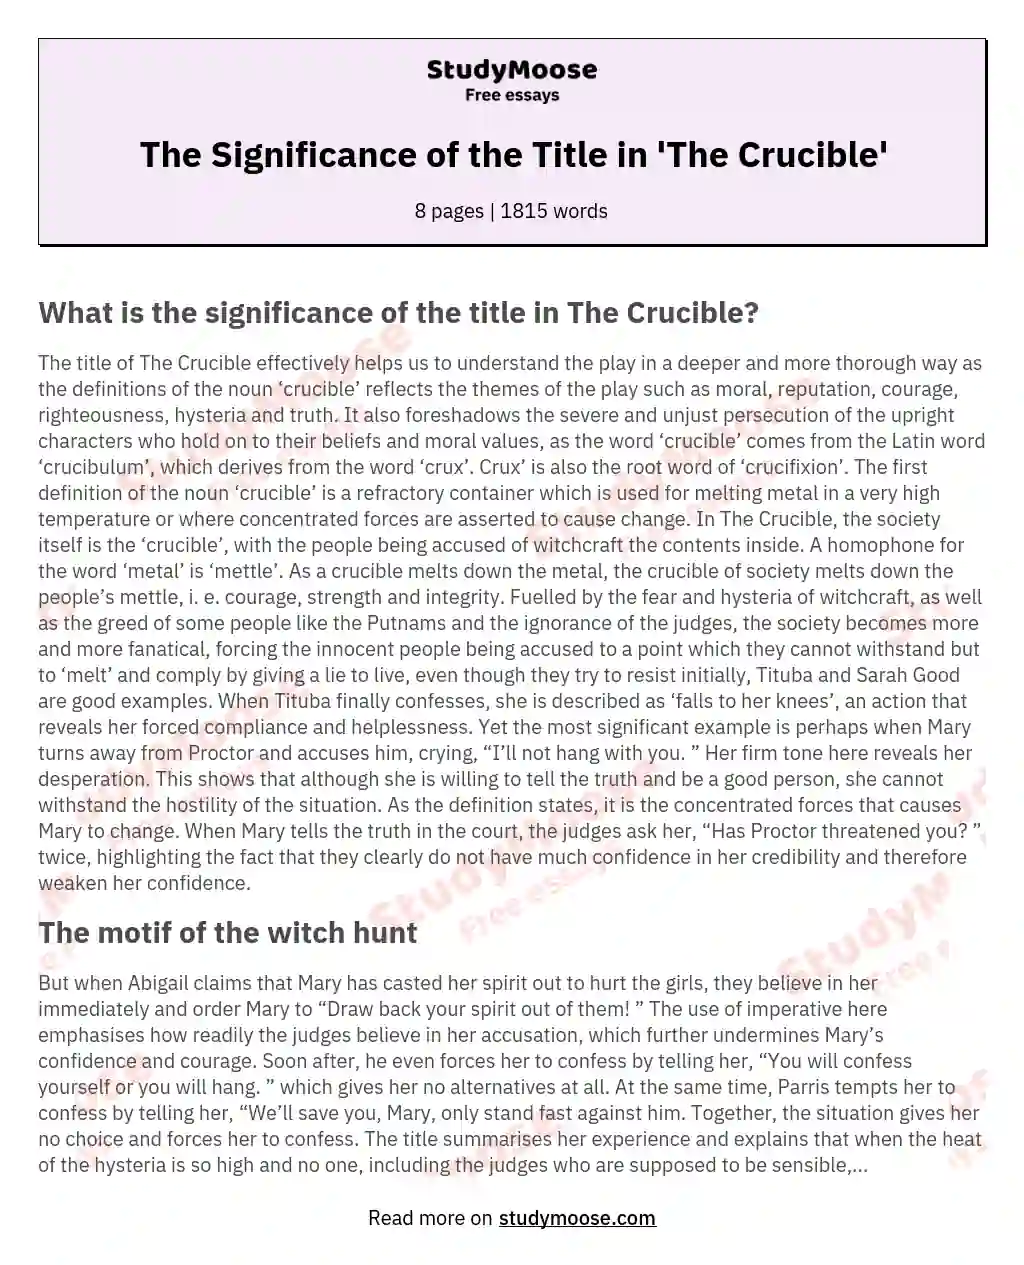 The Significance of the Title in 'The Crucible' essay